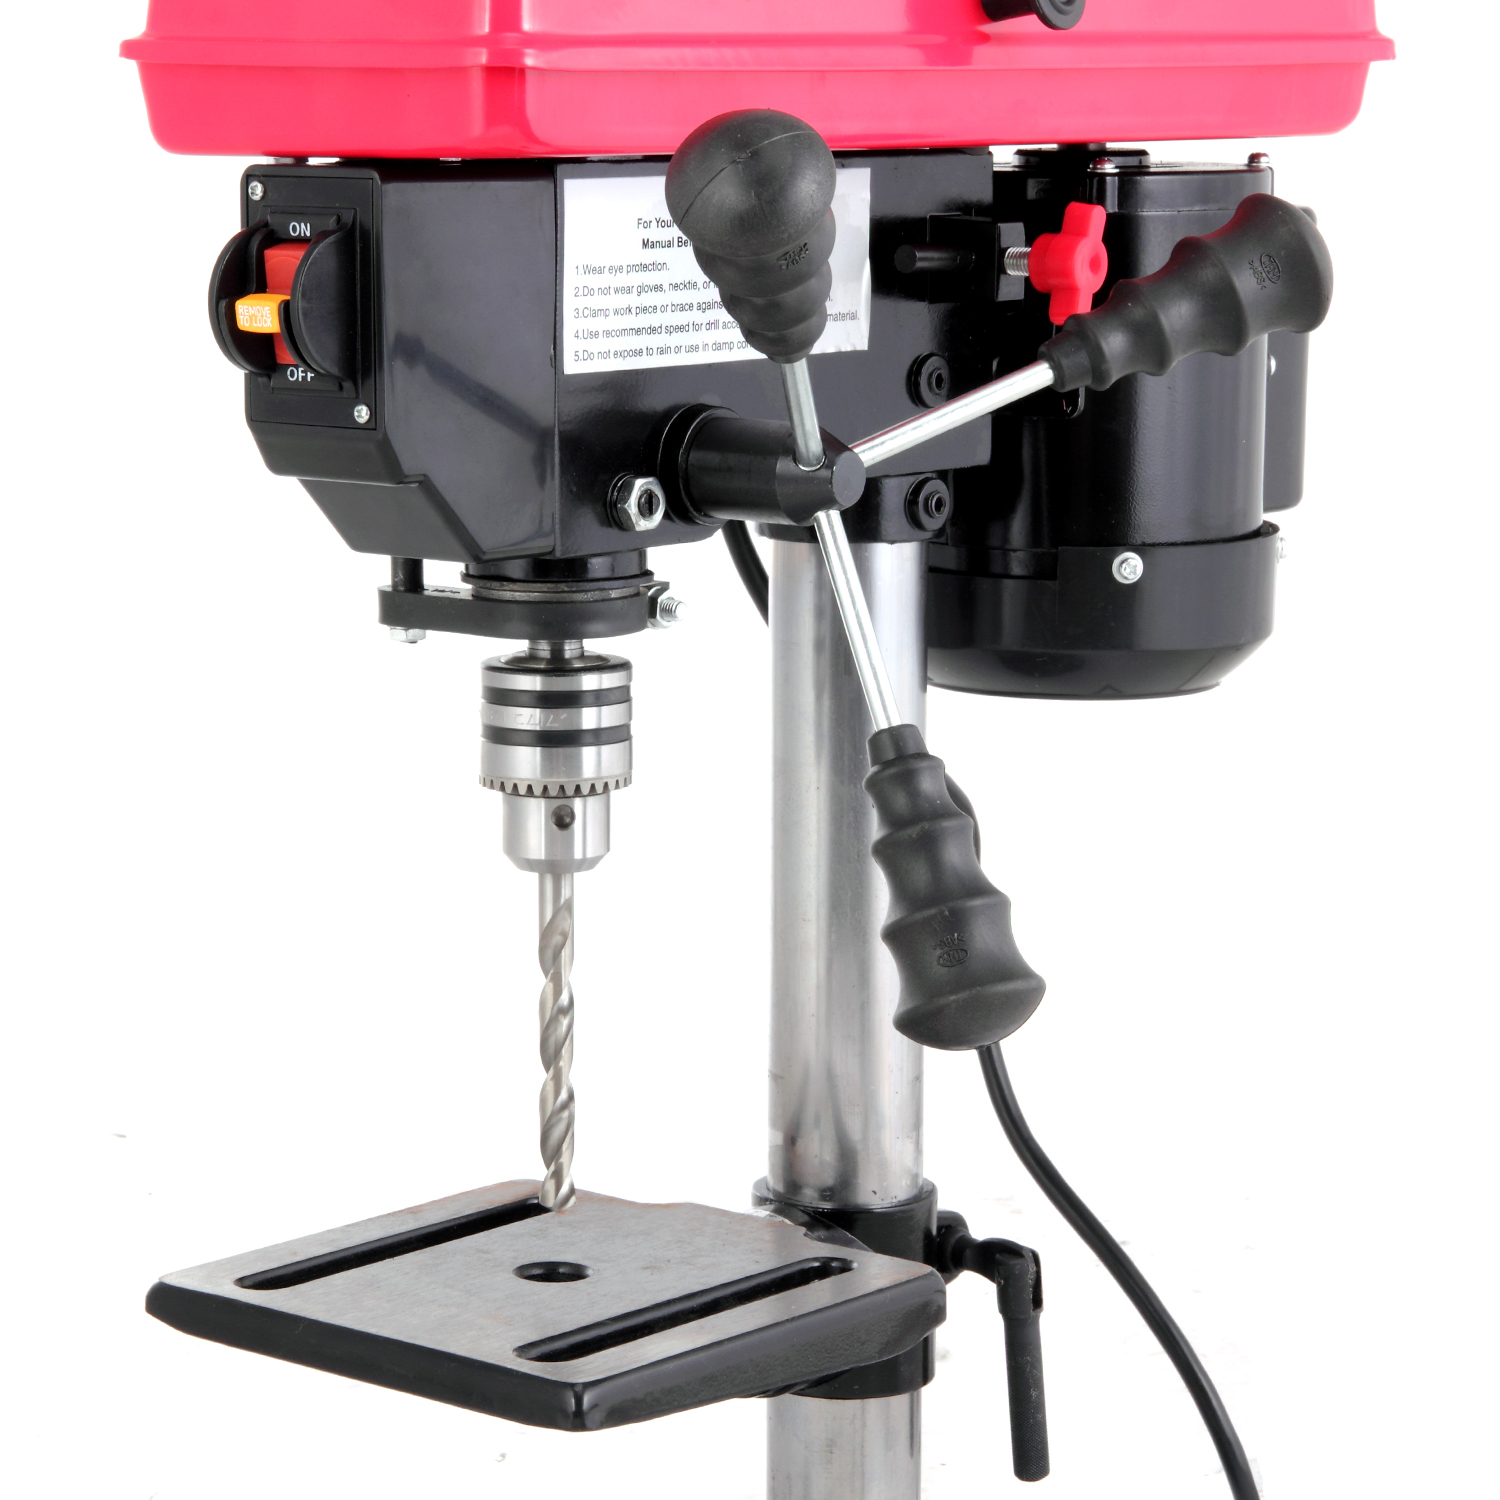 Hyper Tough 2.4 AMP Corded 8 inch Drill Press, 1/2 inch Chuck, 5 Speed with Depth Stop and Three Stem Handle - image 4 of 11